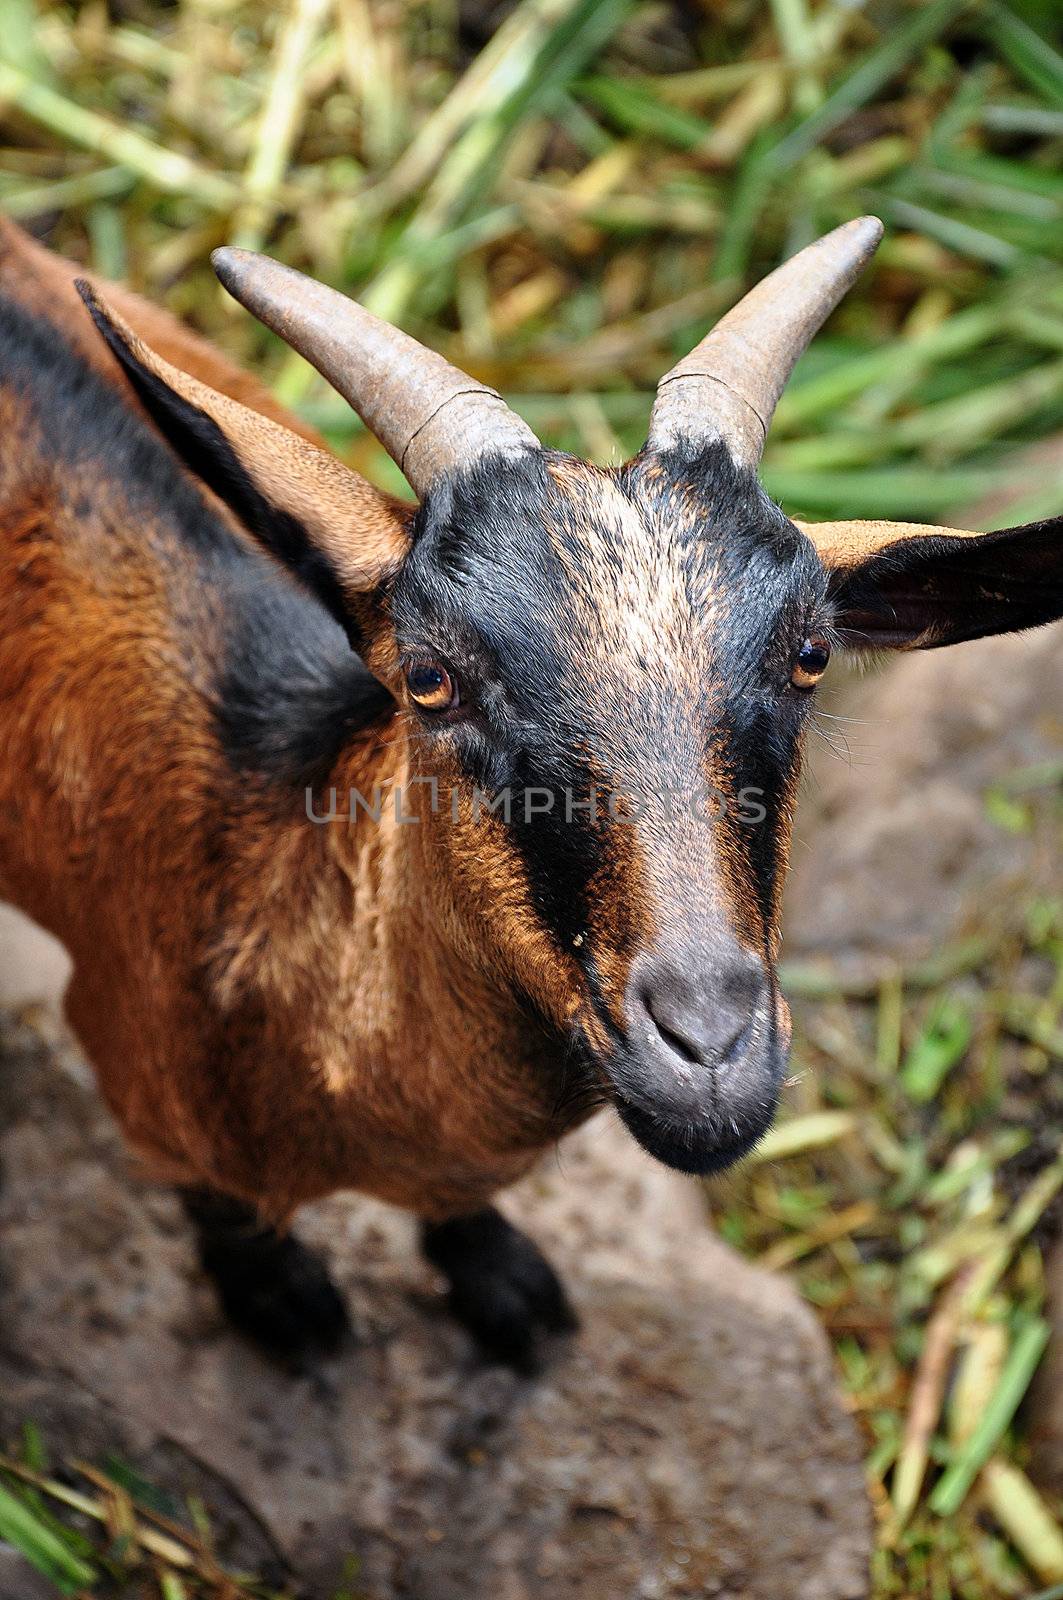 Goats are among the earliest animals domesticated by humans.